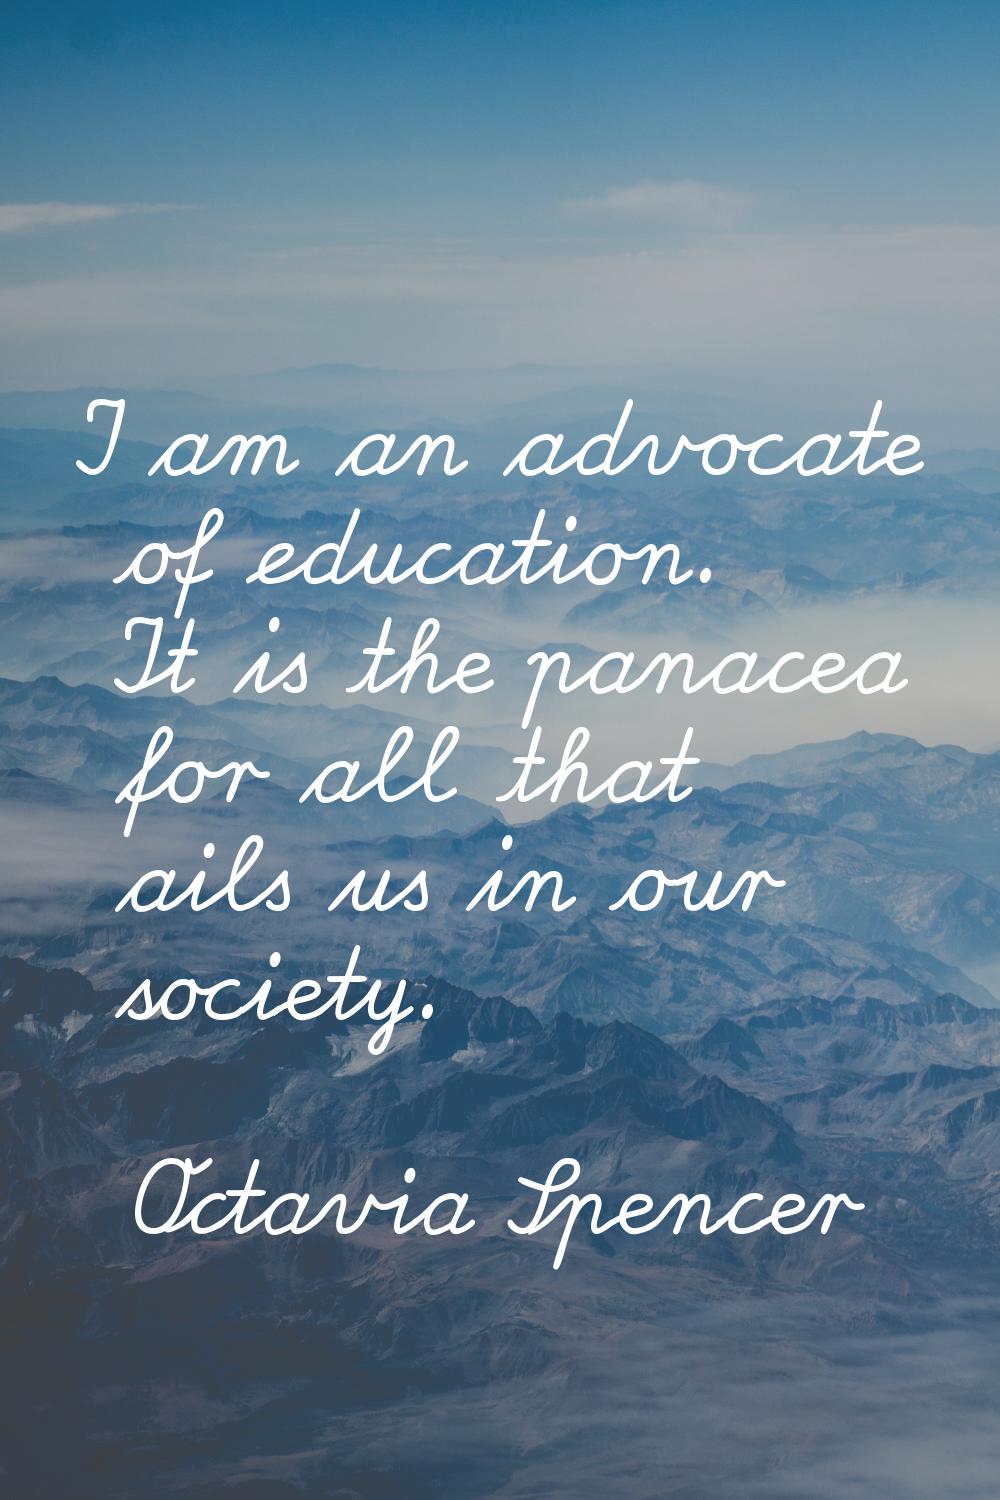 I am an advocate of education. It is the panacea for all that ails us in our society.